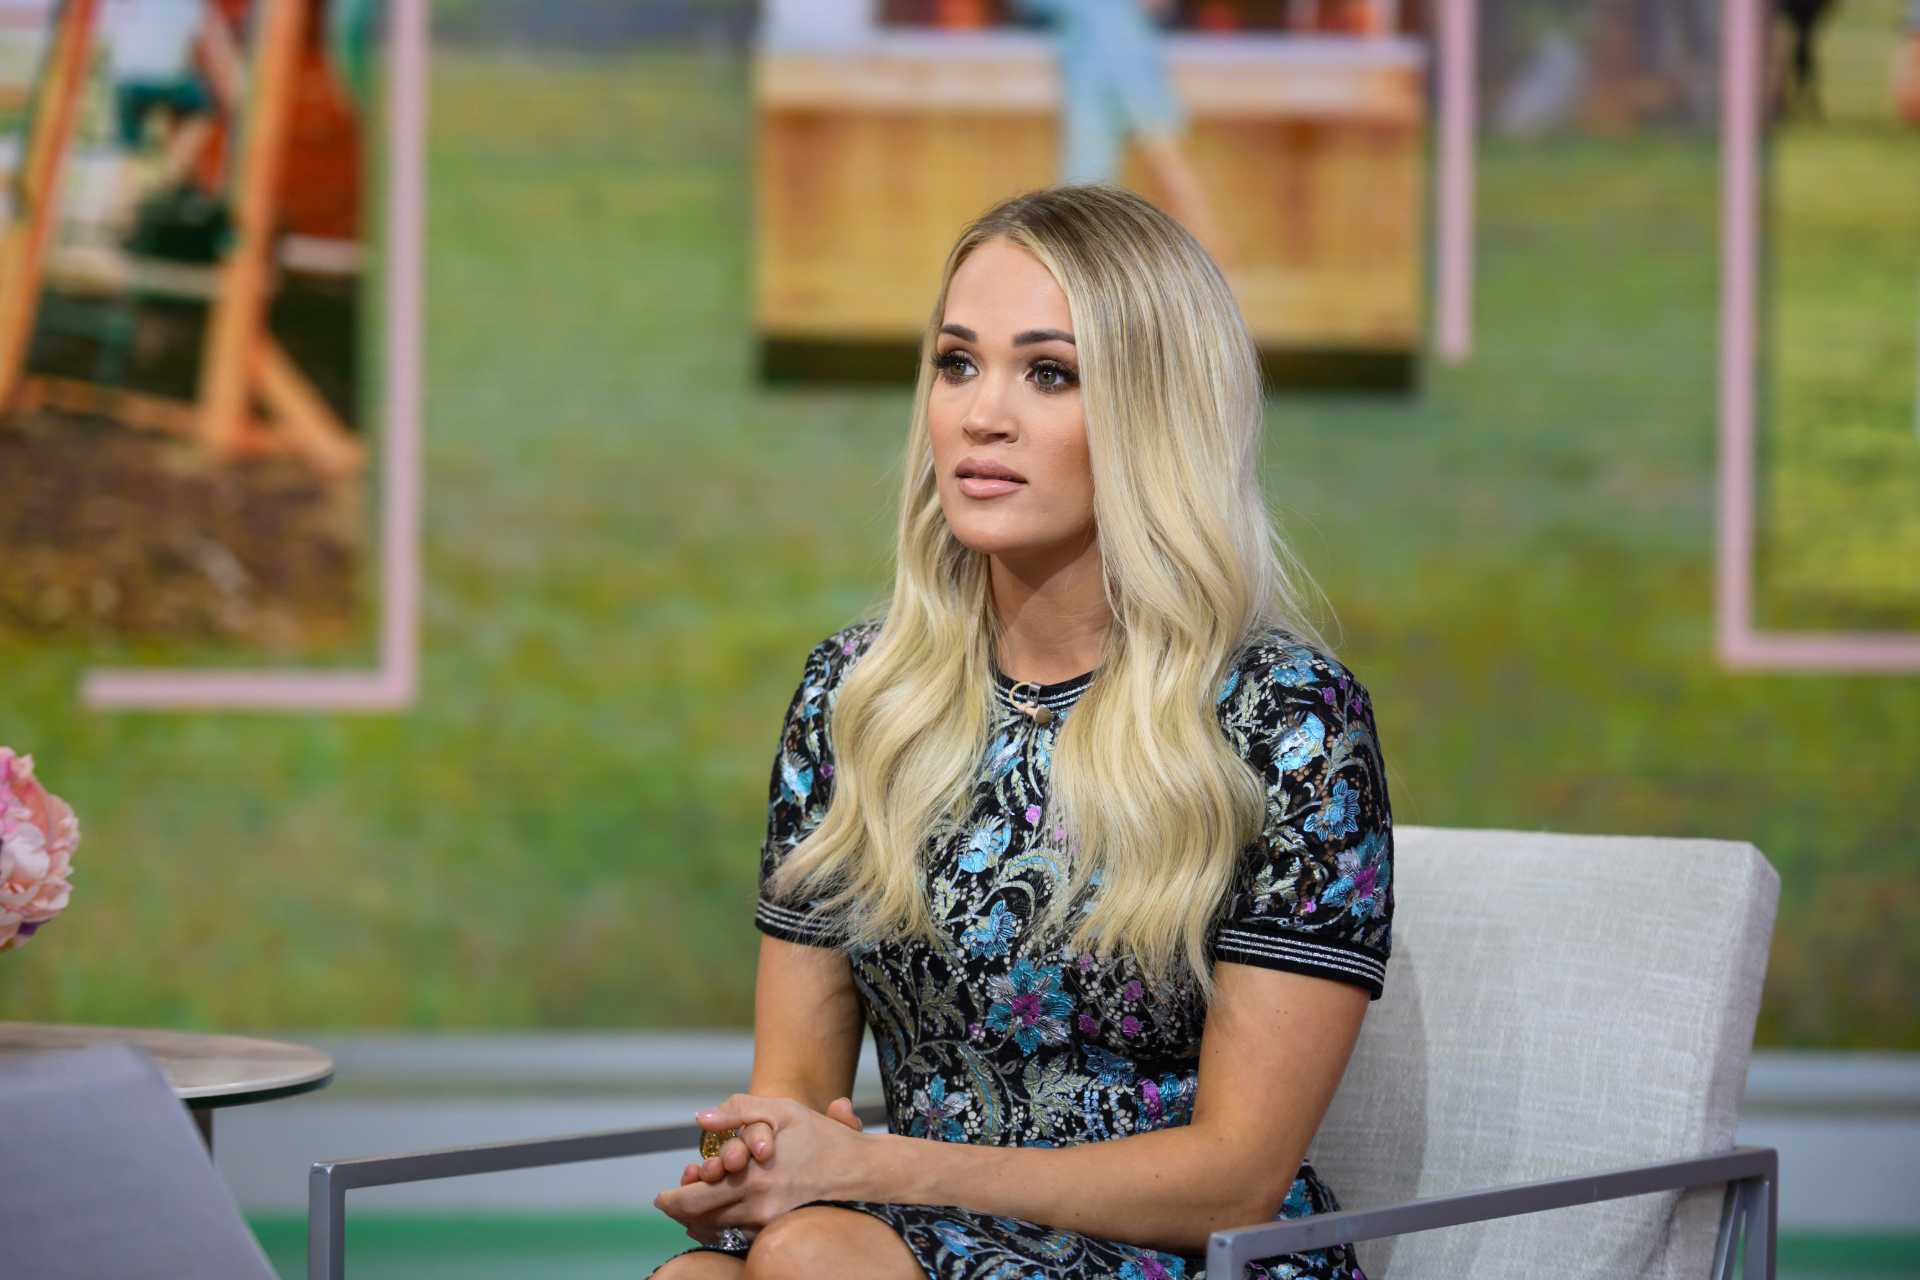 Carrie Underwood Shares Personal Family Photos in 'What I Never